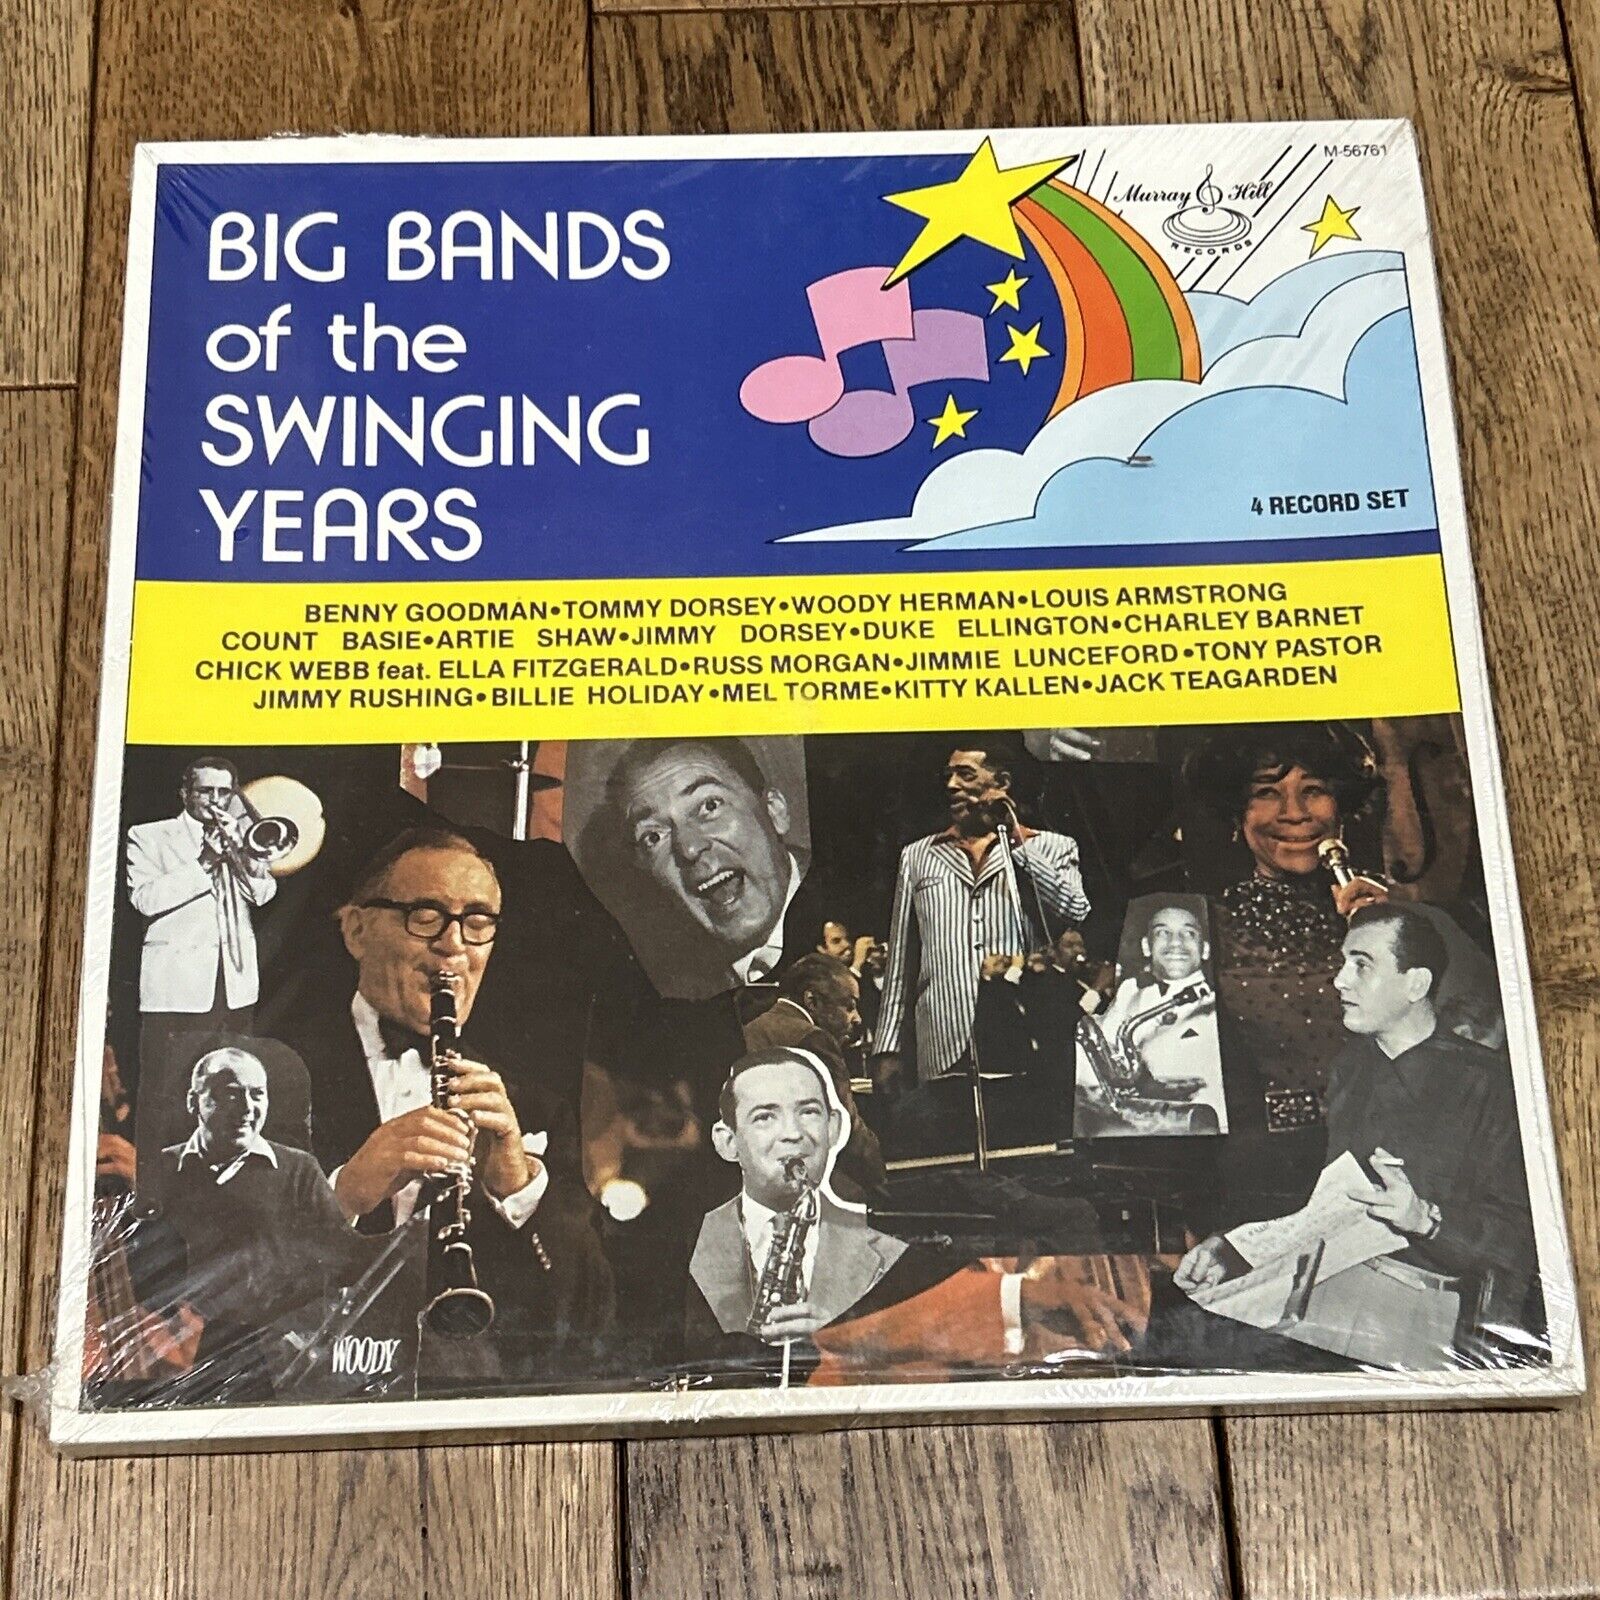 Vintage NOS Big Bands Of The Swinging Years 4 Record Set Sealed